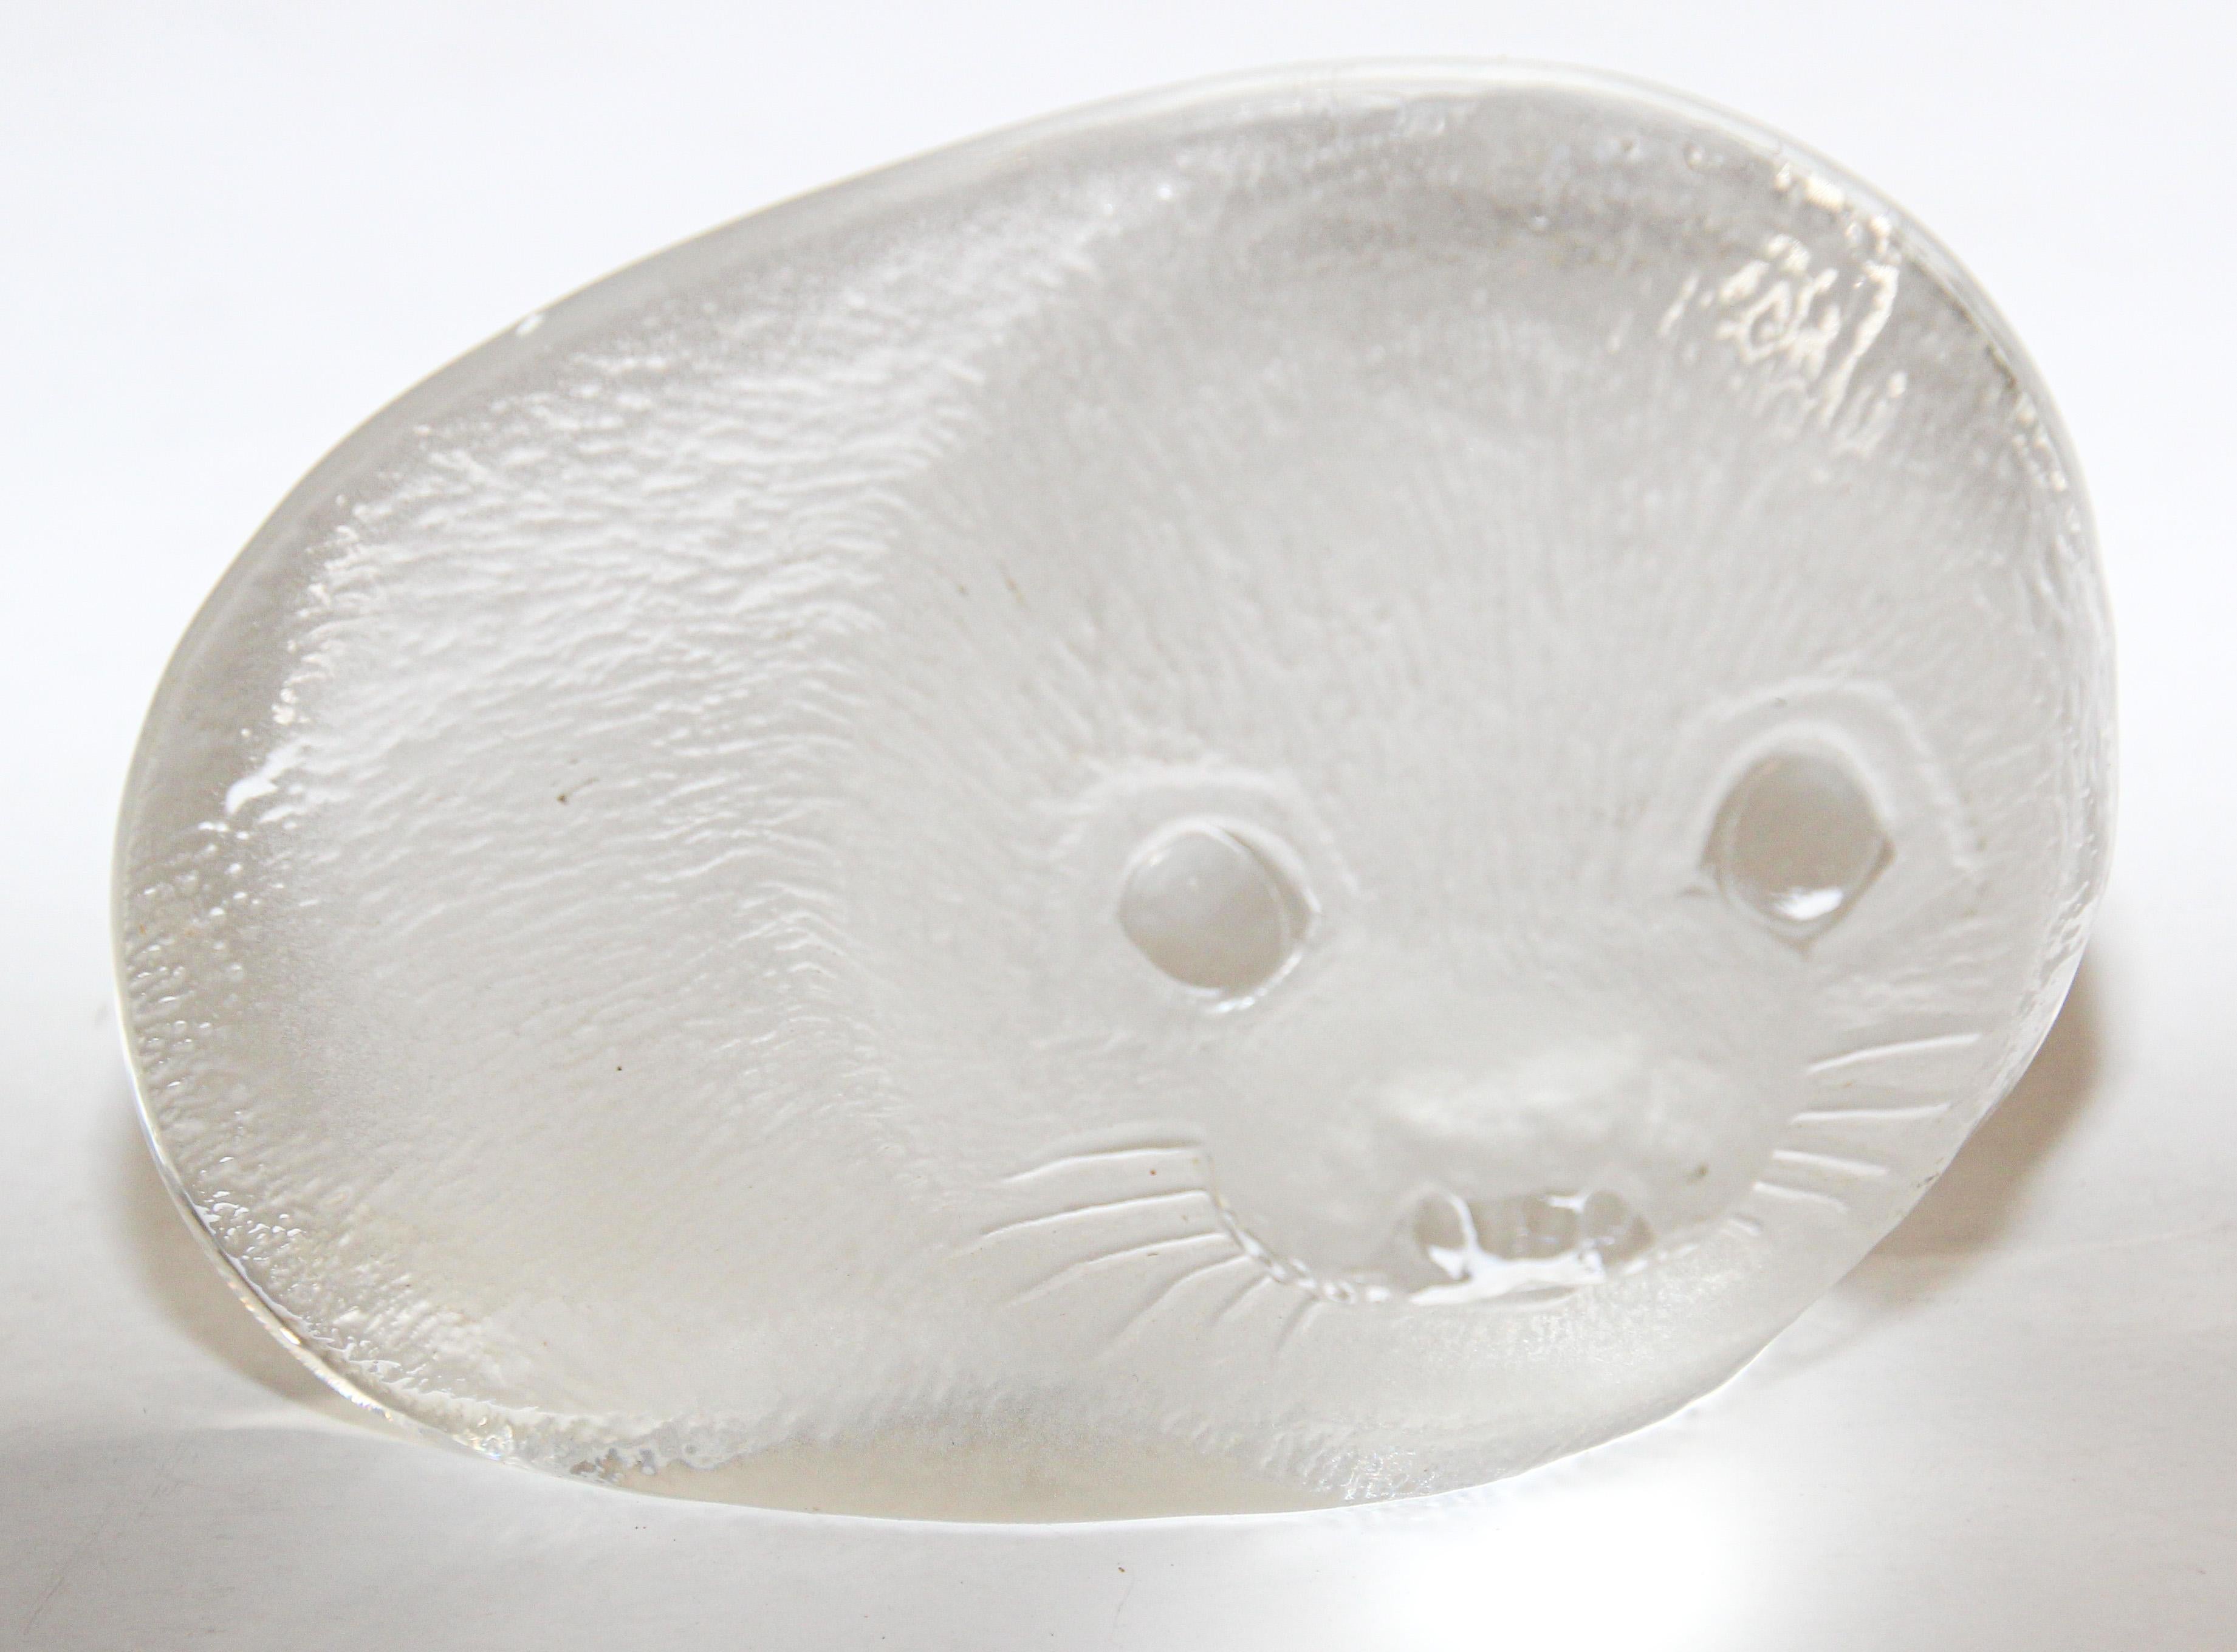 Baby seal etched crystal sculpture by Mats Jonasson Sweden. 
This crystal art glass sculpture is a work of art with its hand made, hand etched exquisite detailing. 
The highly detailed etching and sparkling crystal makes this fine crystal piece